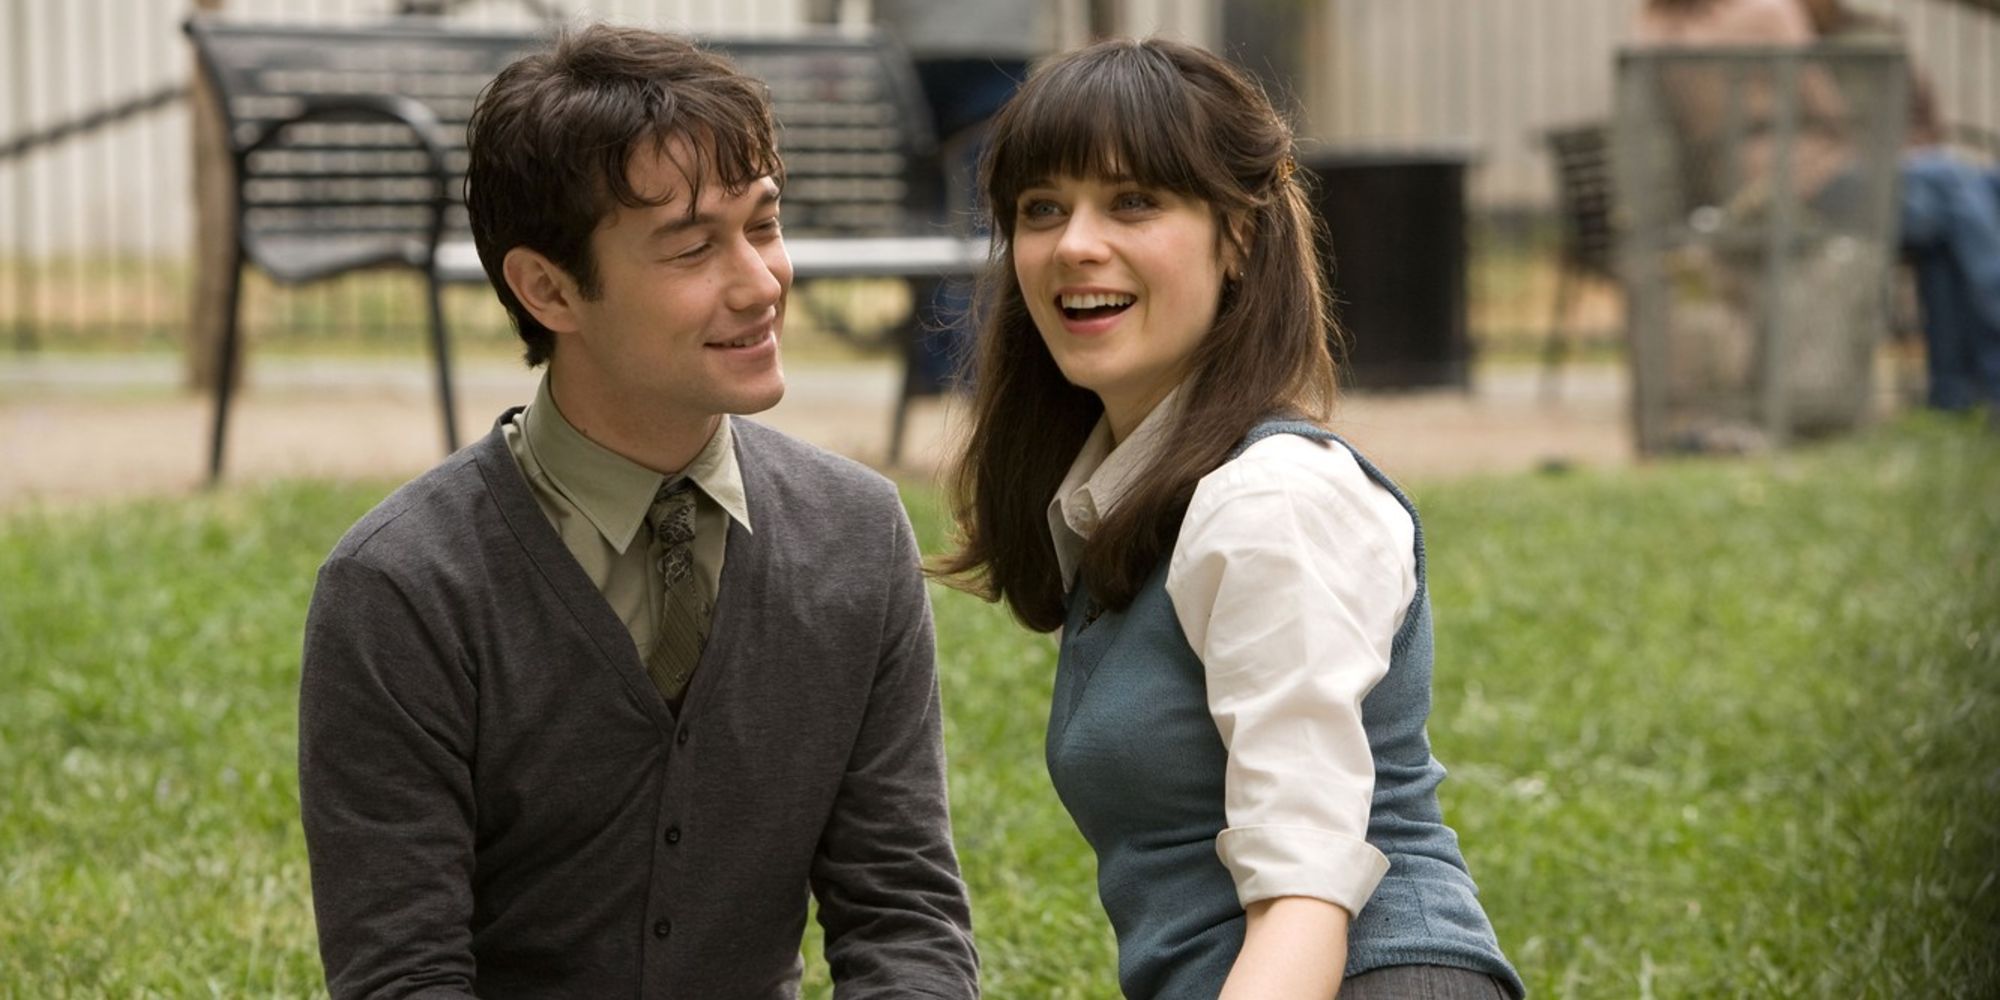 Tom and Summer at the park laughing in 500 Days Of Summer.